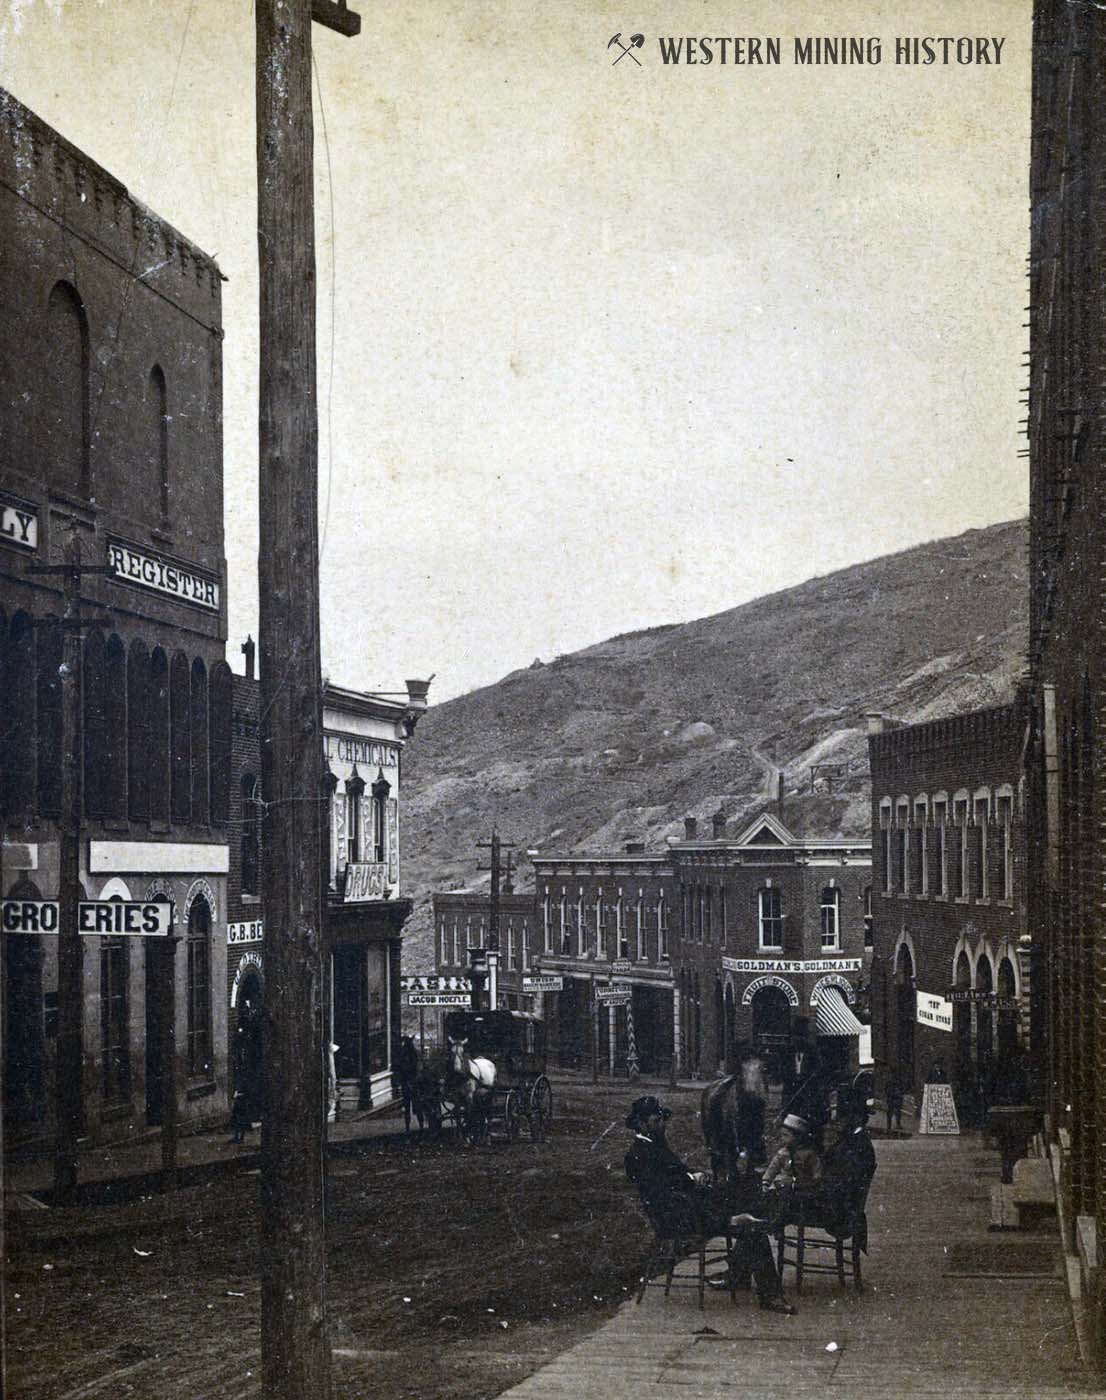 Eureka and Lawrence Streets - Central City, Colorado ca. 1880